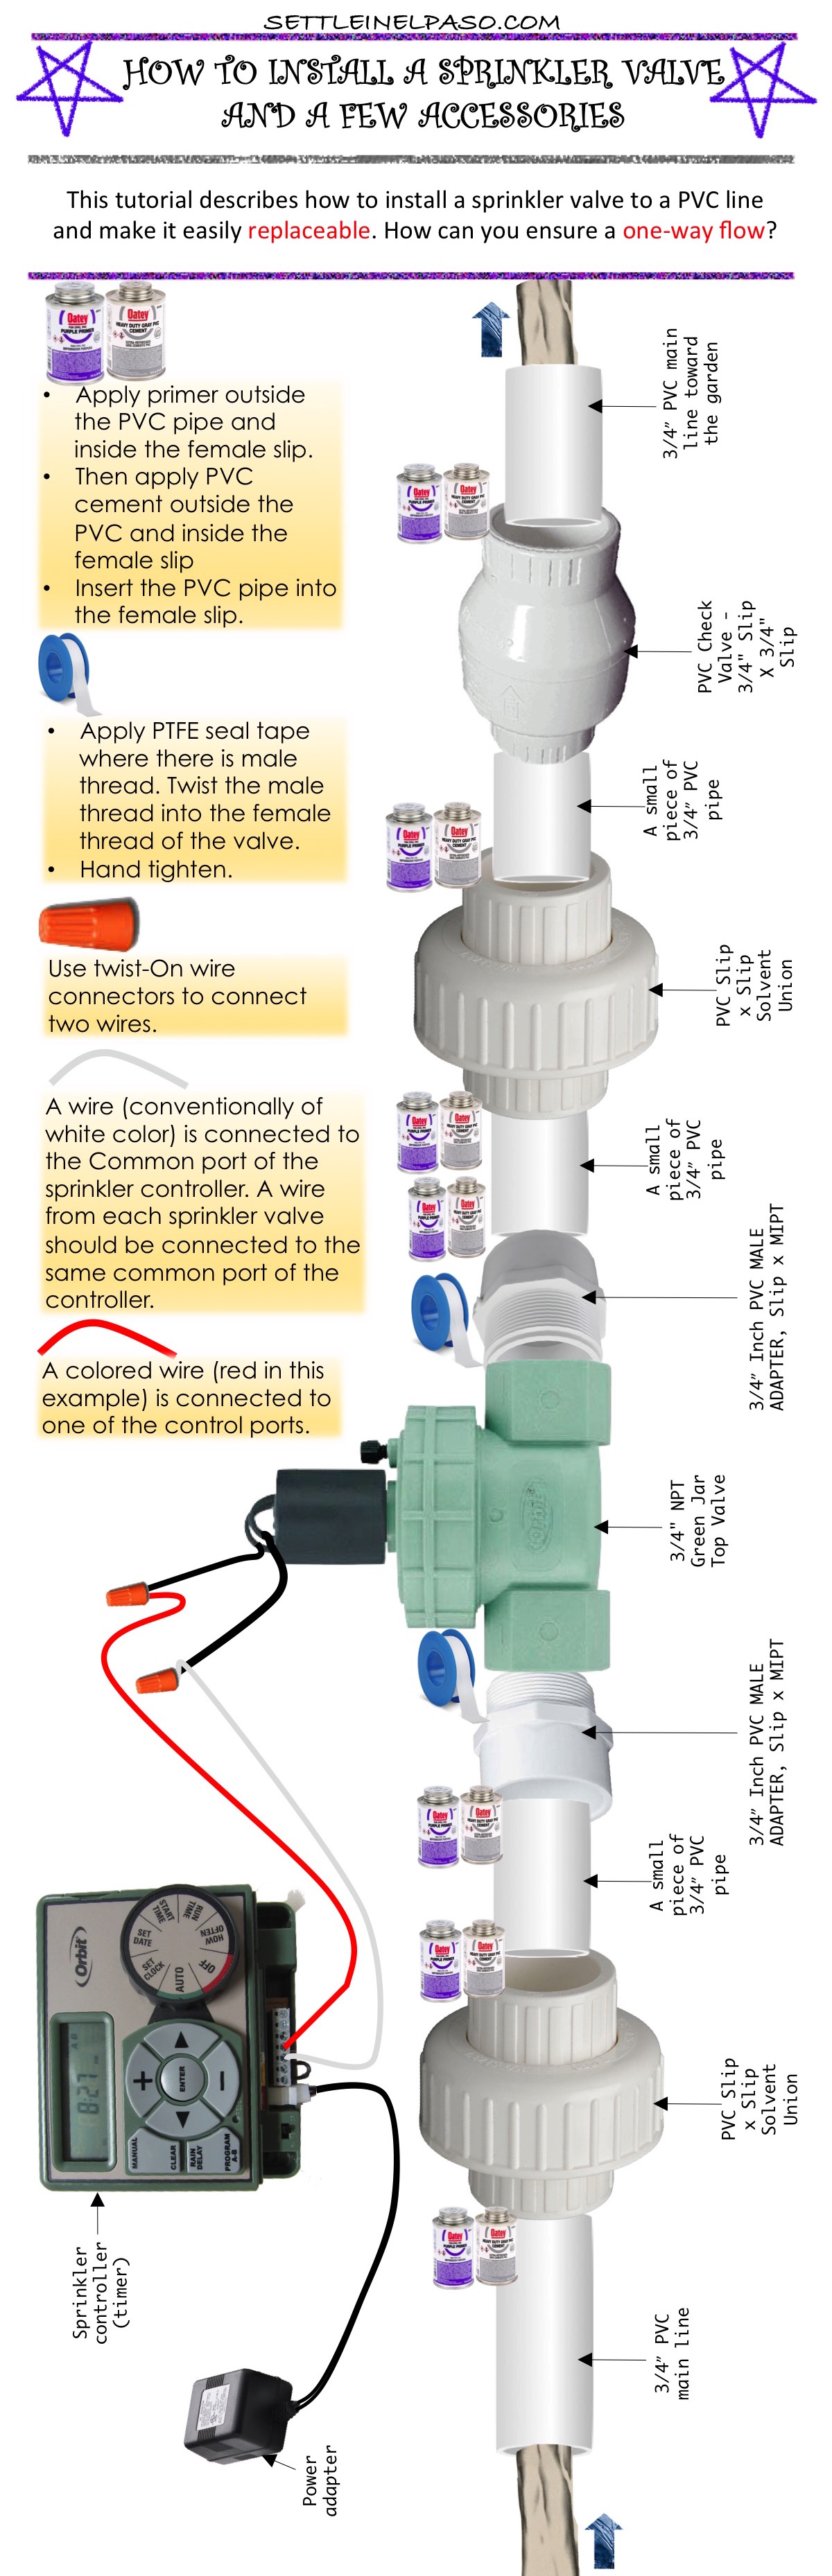 How to install a sprinkler valve in replaceable manner. 